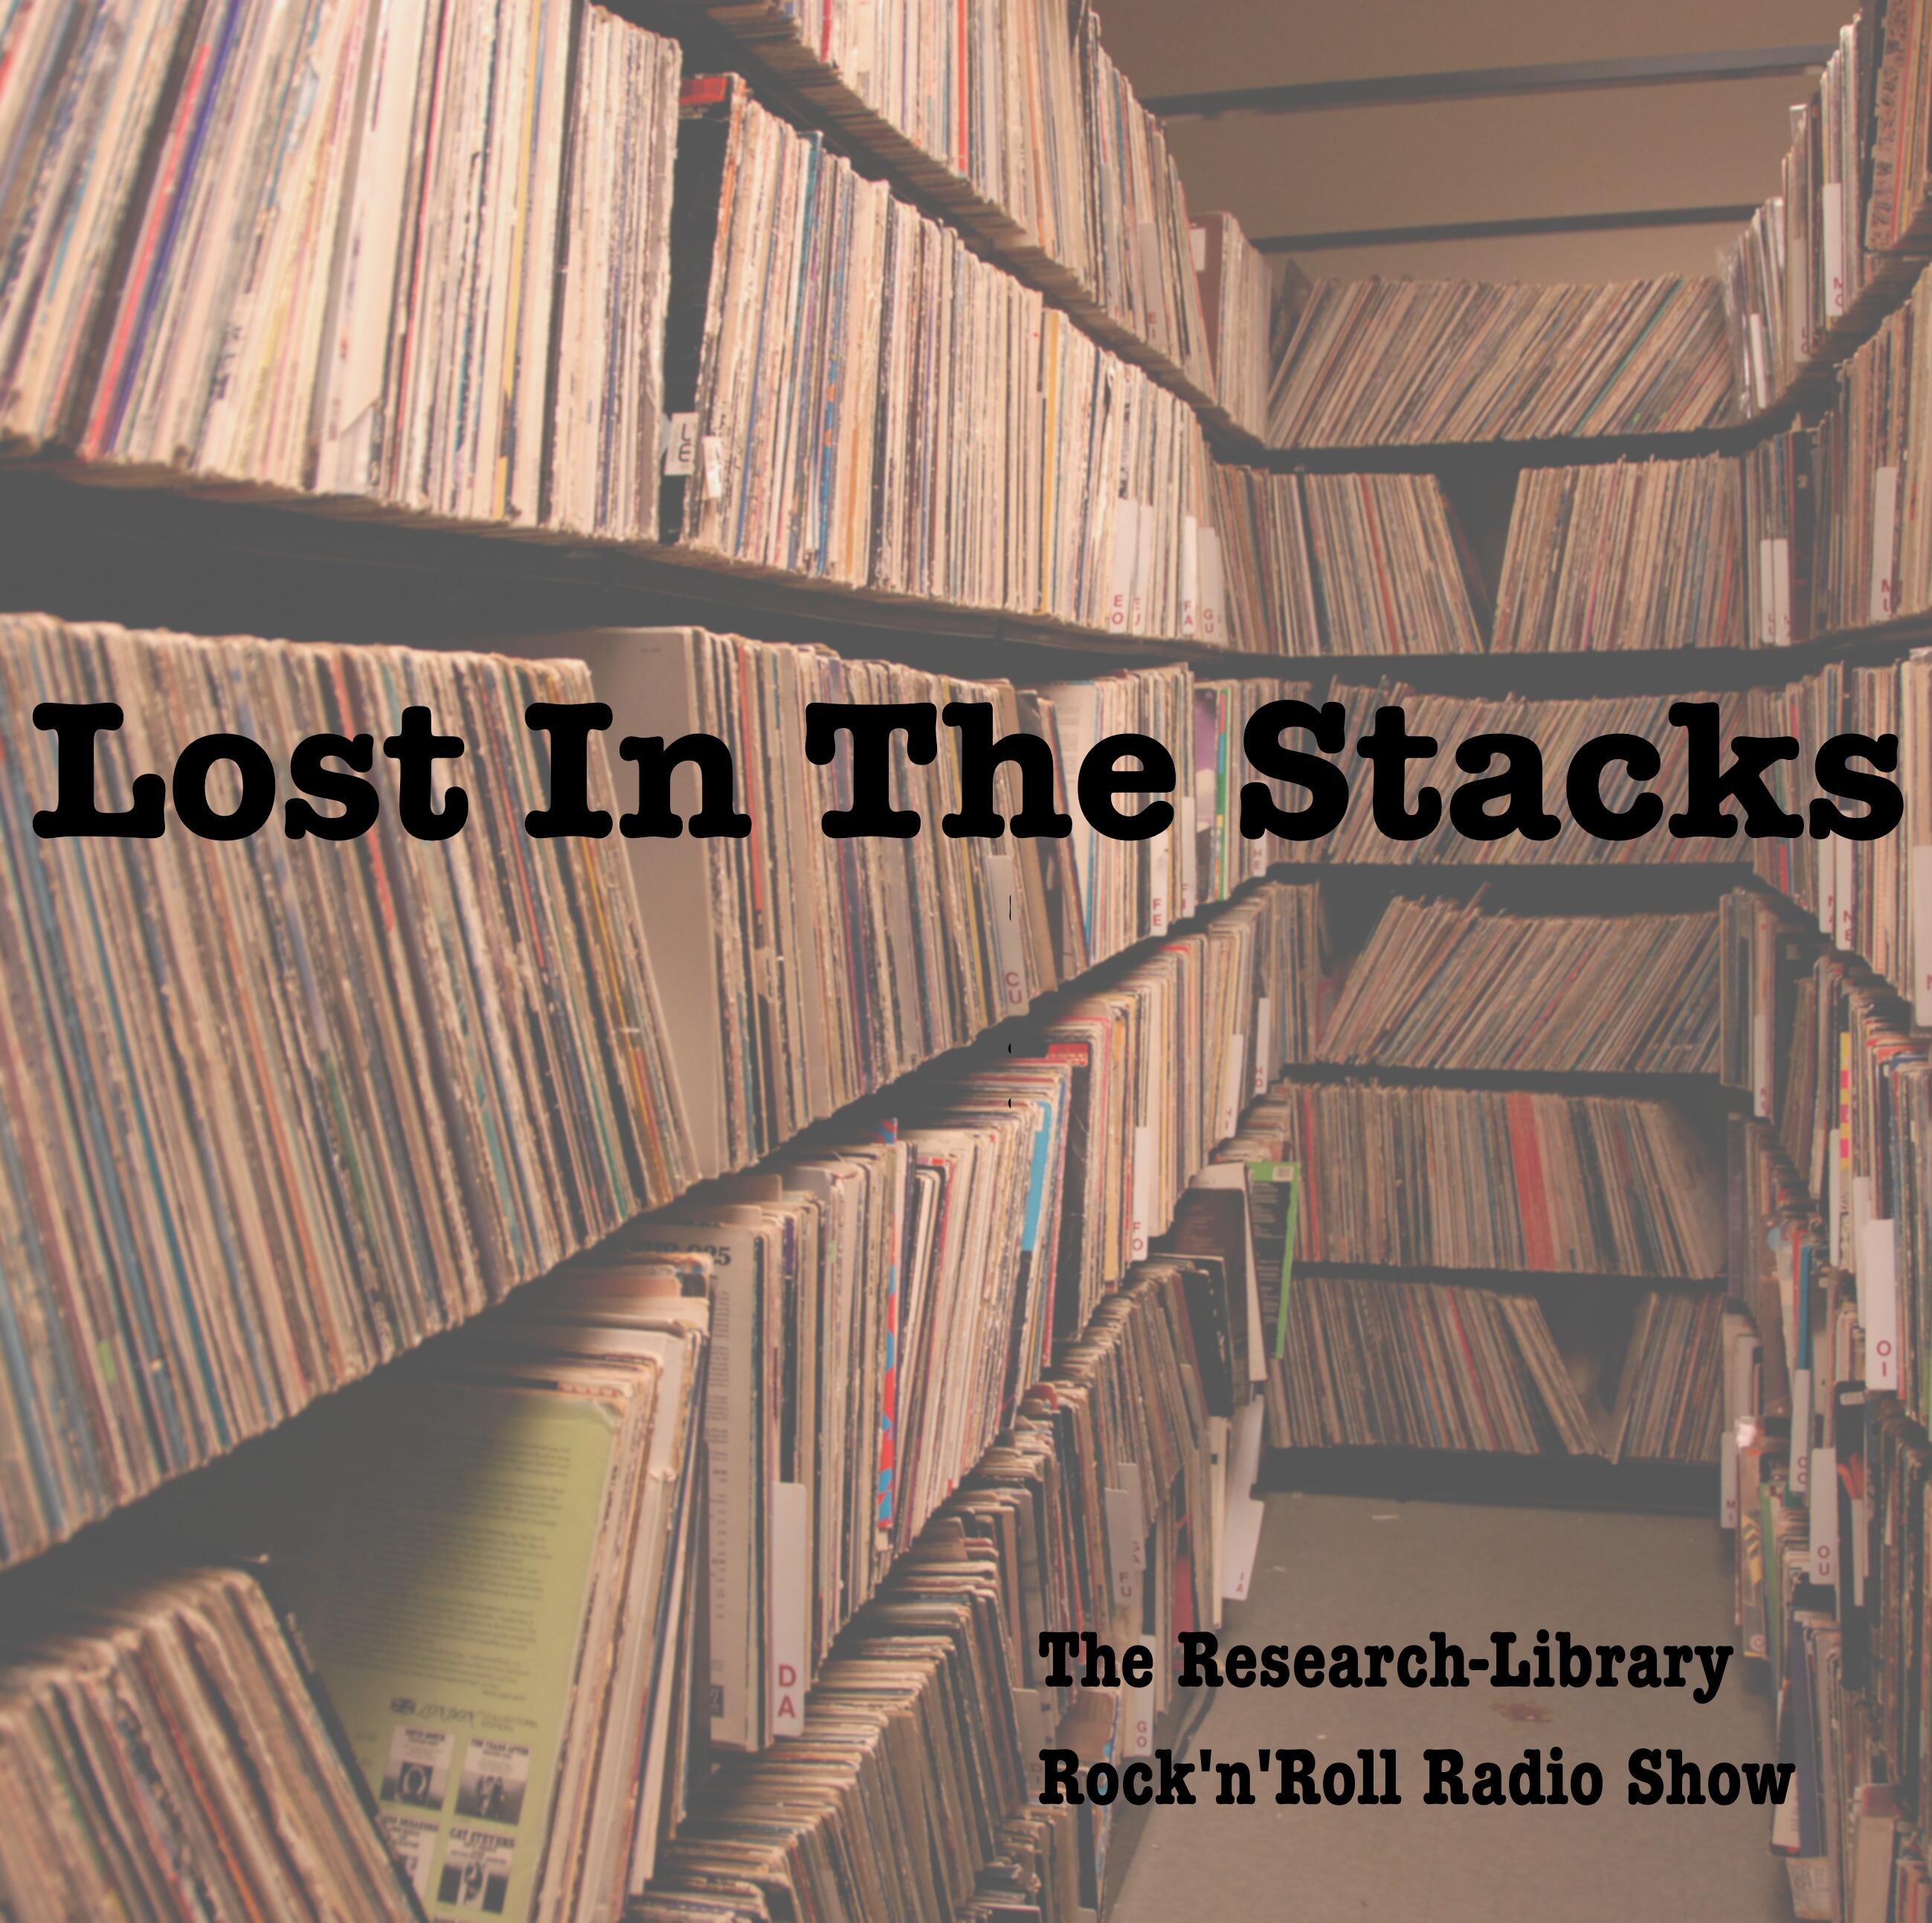 Lost library. Lost in Library. Doves "Lost Souls (2lp)". Lost in the Stacks celebrates. Robert Ellis the Rock Library.